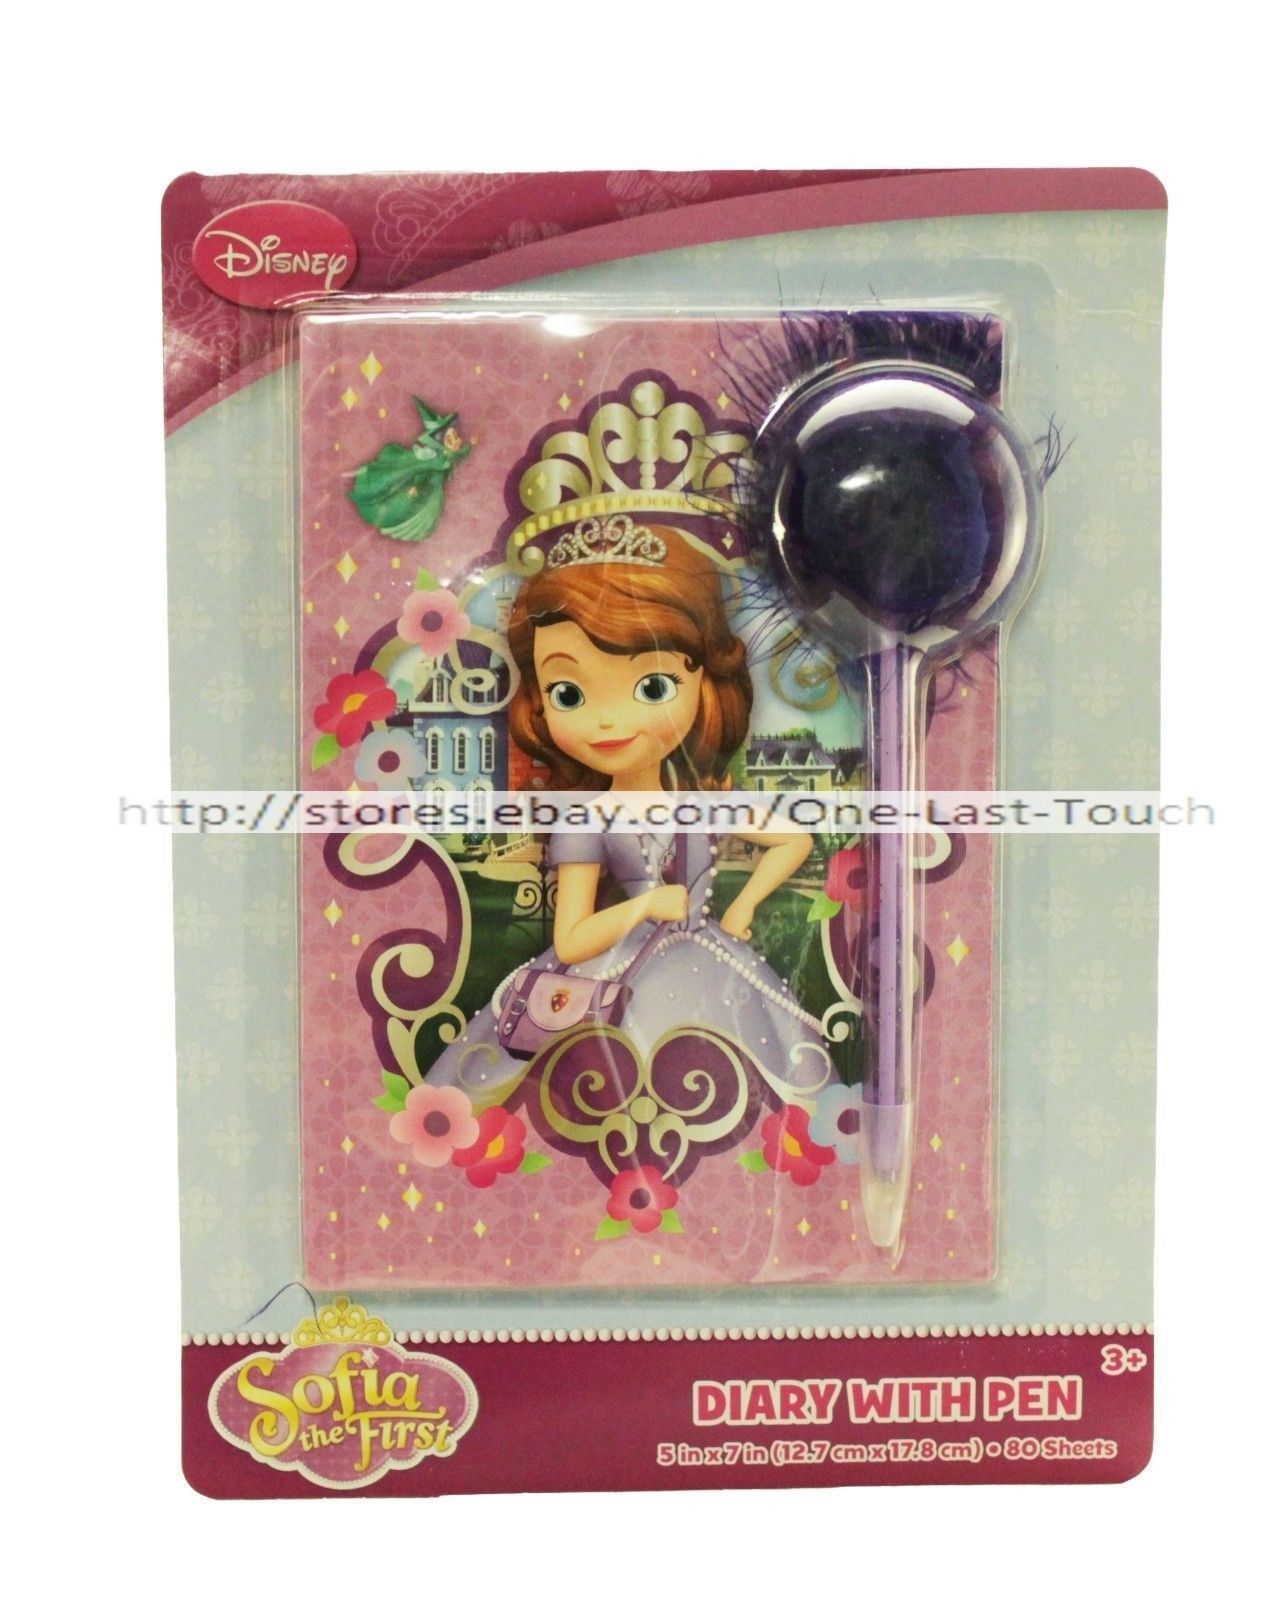 SOFIA THE FIRST 80 Lined Sheets DIARY w/POM POM PEN Purple Feathers DISNEY New! - $5.41